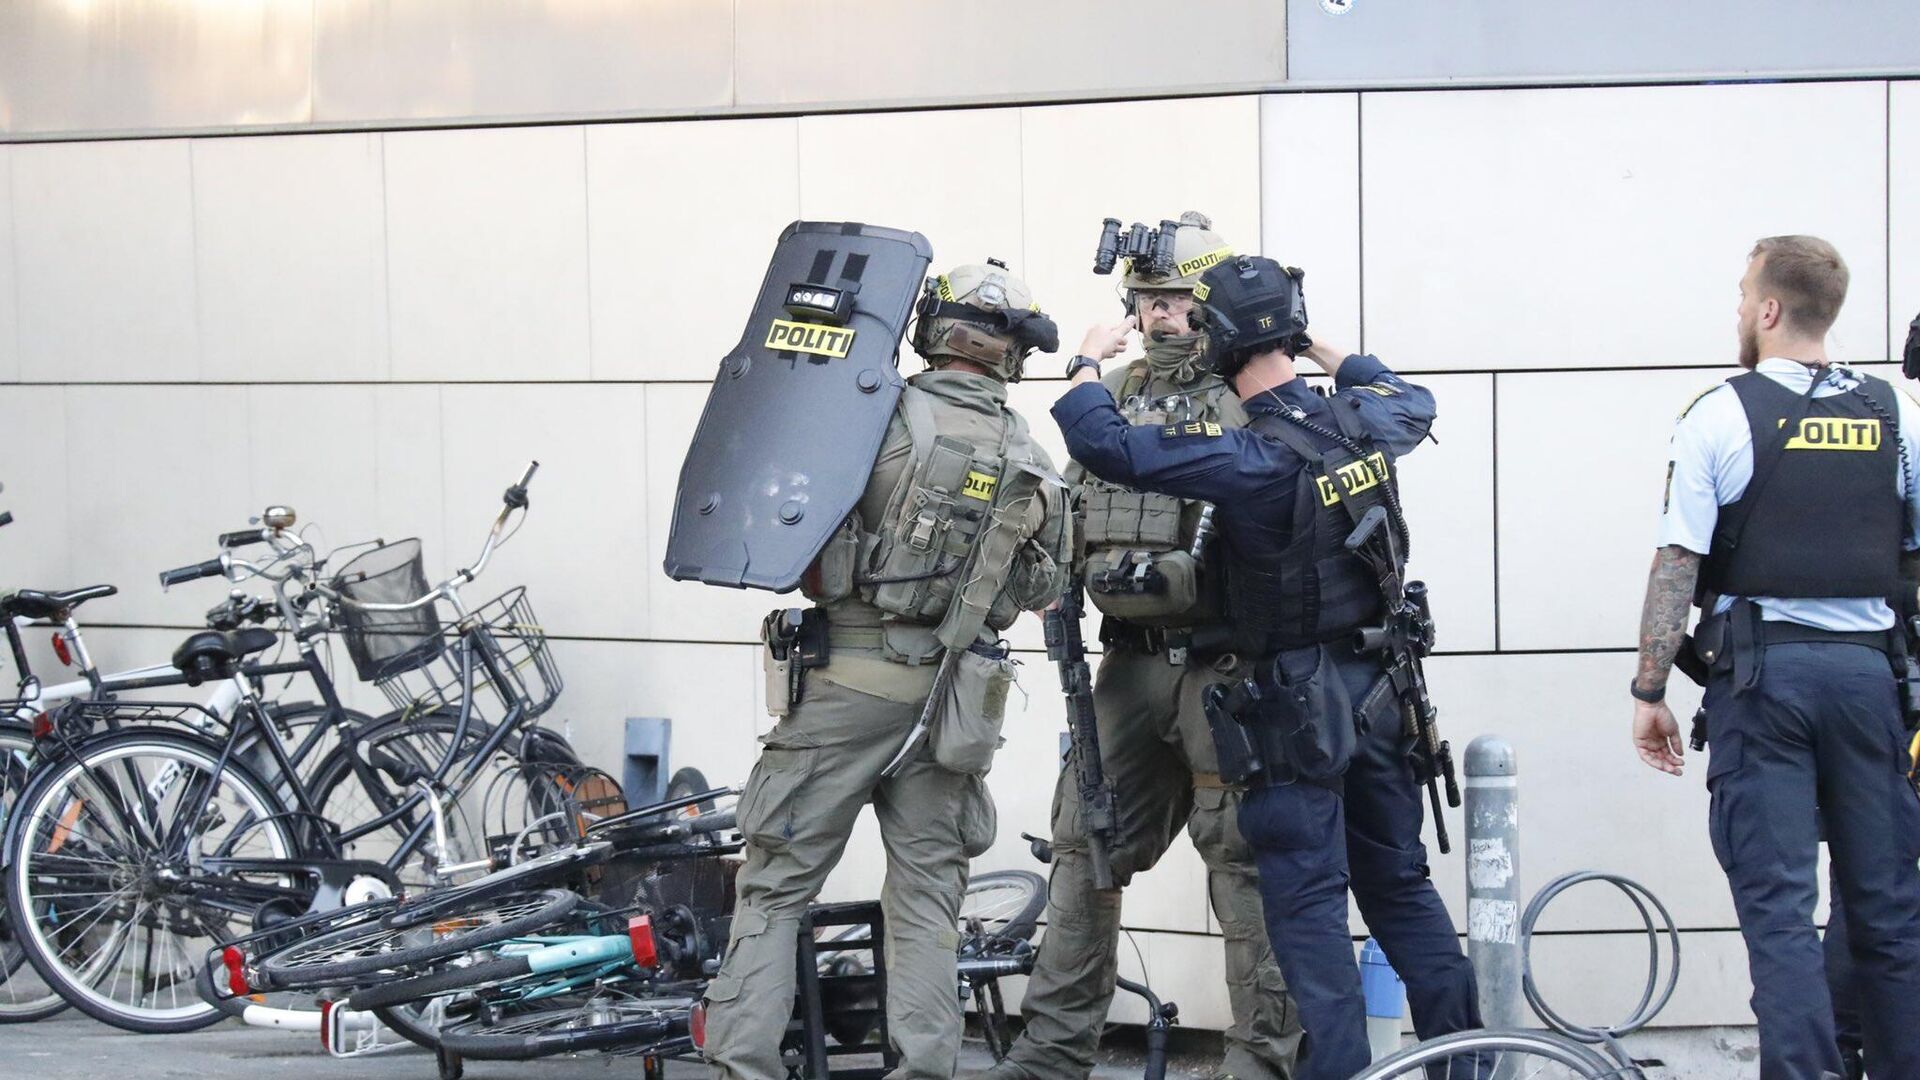 Danish police announced on Twitter that “several people” were wounded in a shooting at the Copenhagen Fields shopping mall in Denmark’s capital on Sunday - Sputnik International, 1920, 03.07.2022